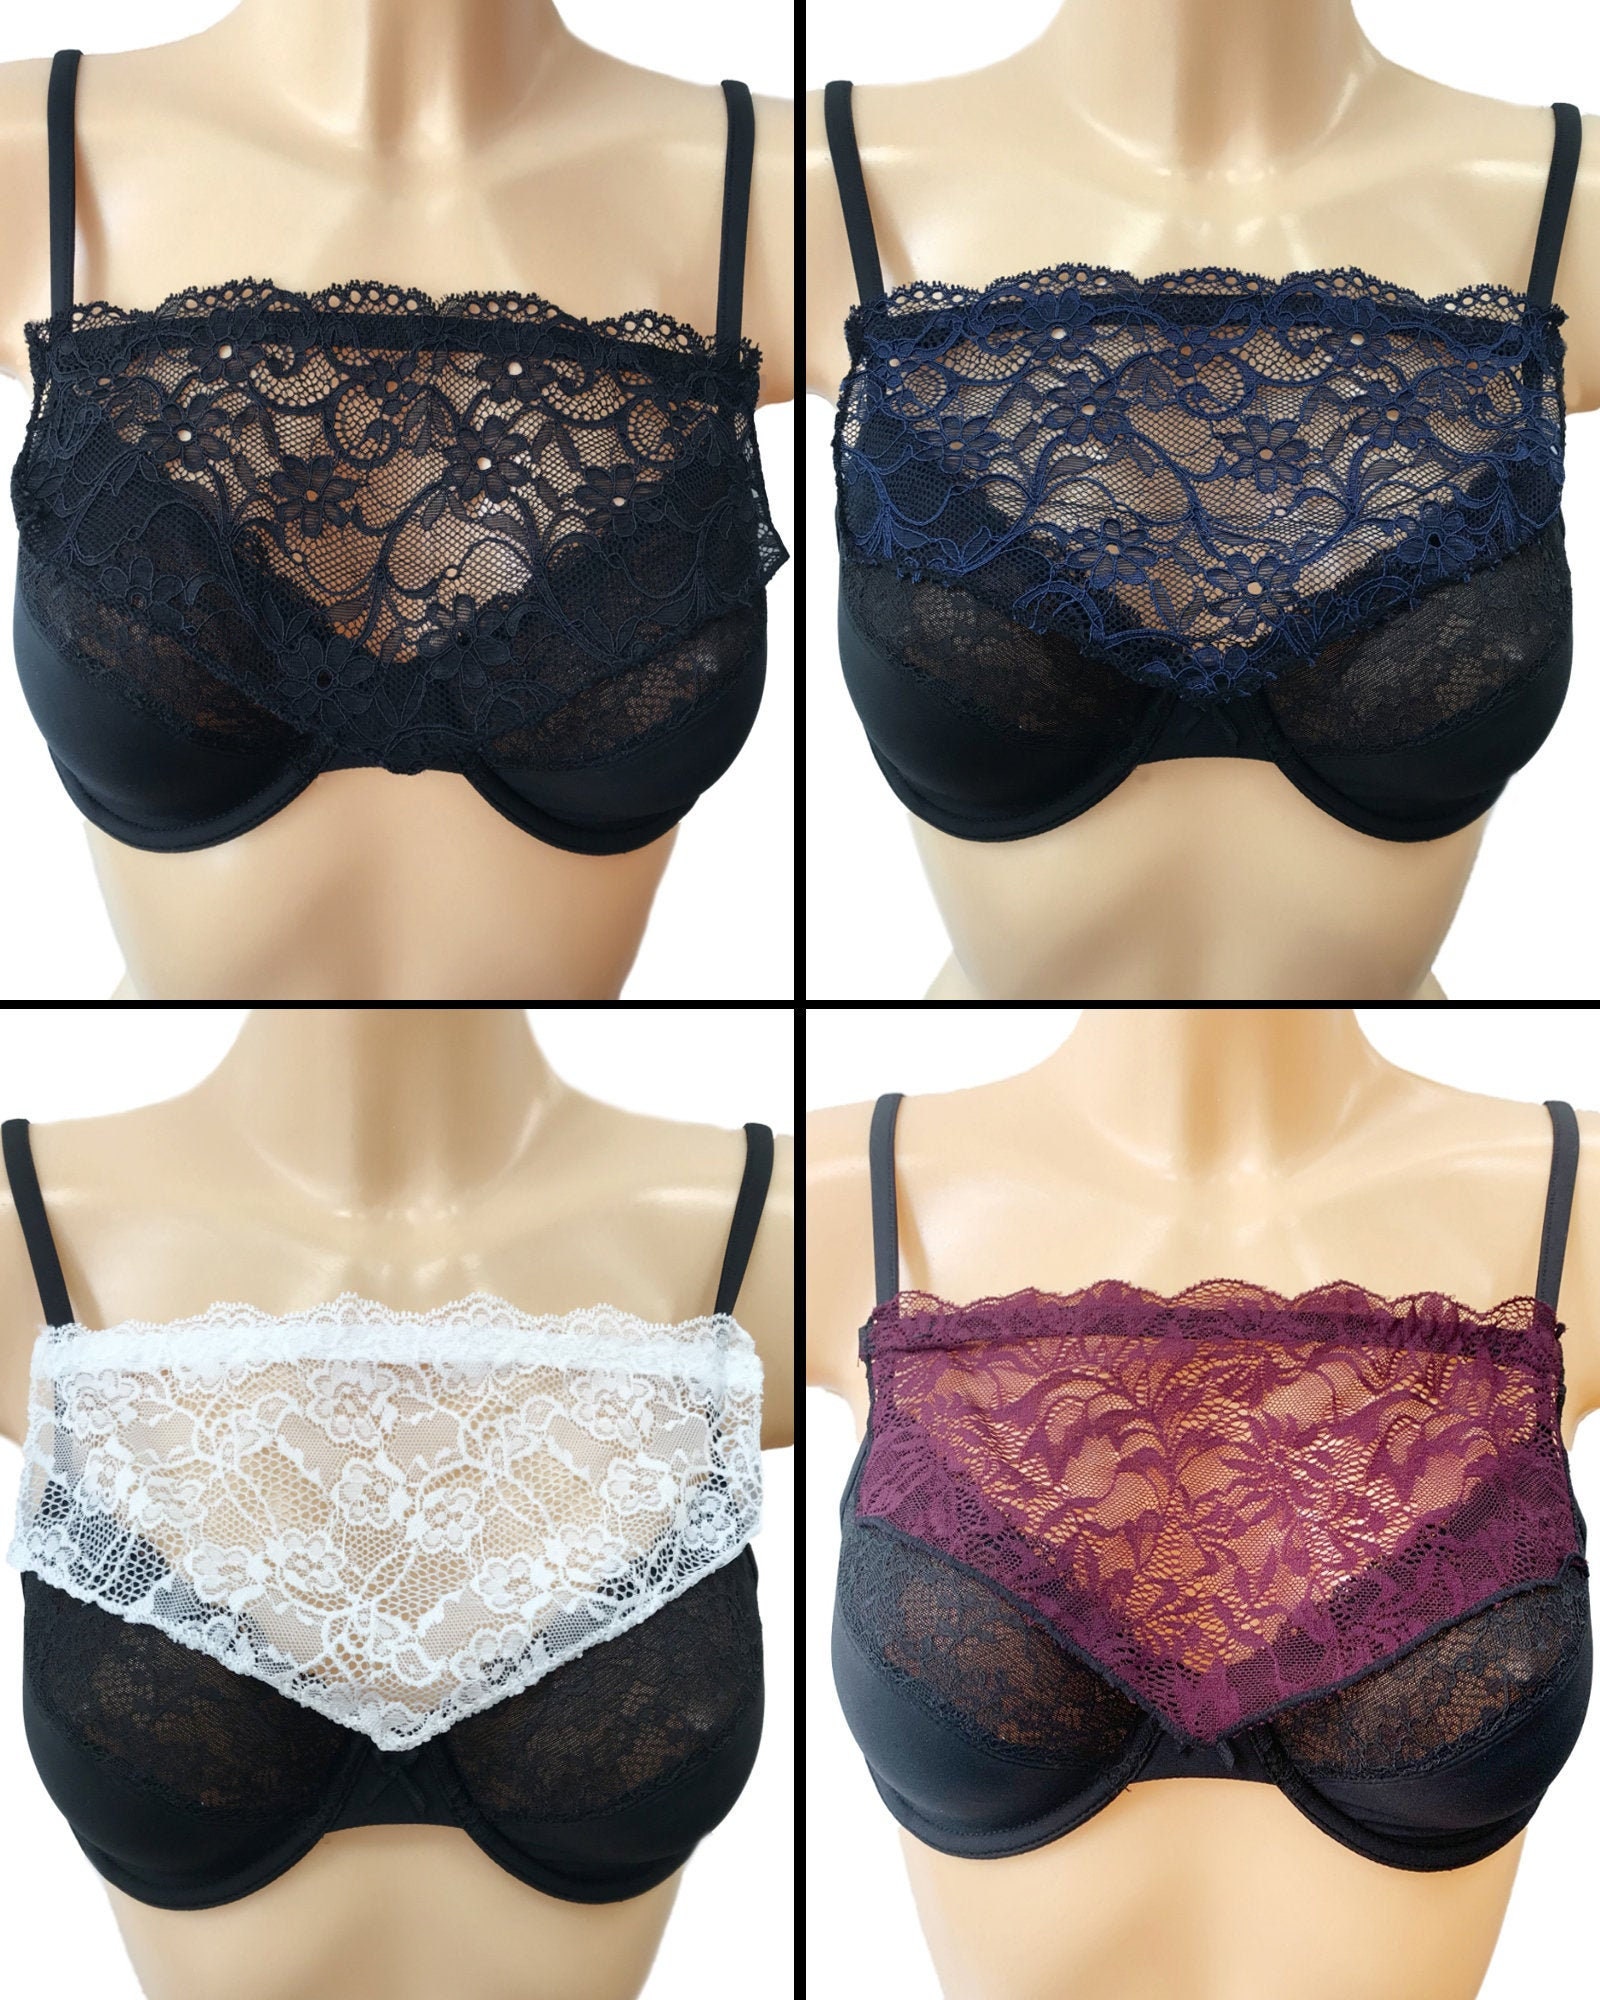 Modesty Panel Lace Bra Insert Instant Camisole Cleavage Cover Black Navy  White Purple -  Canada